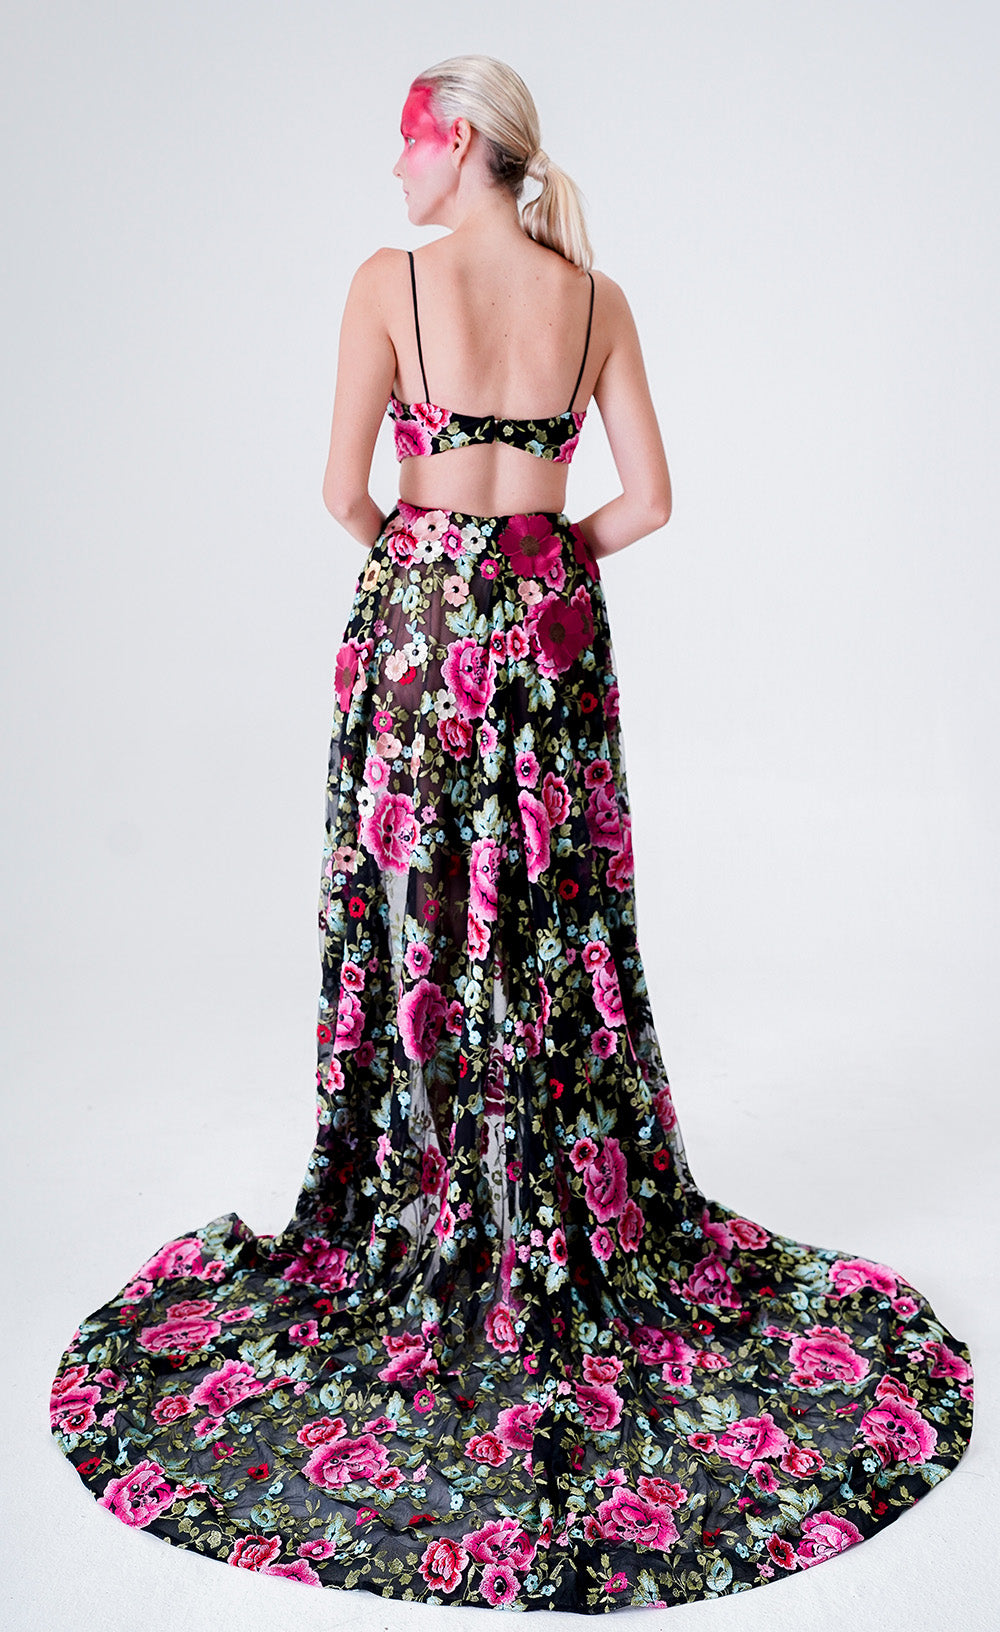 FLORAL APPLIQUE ON FLORAL LACE WITH CUT OUT BODICE AND HIGH SLIT SKIRT